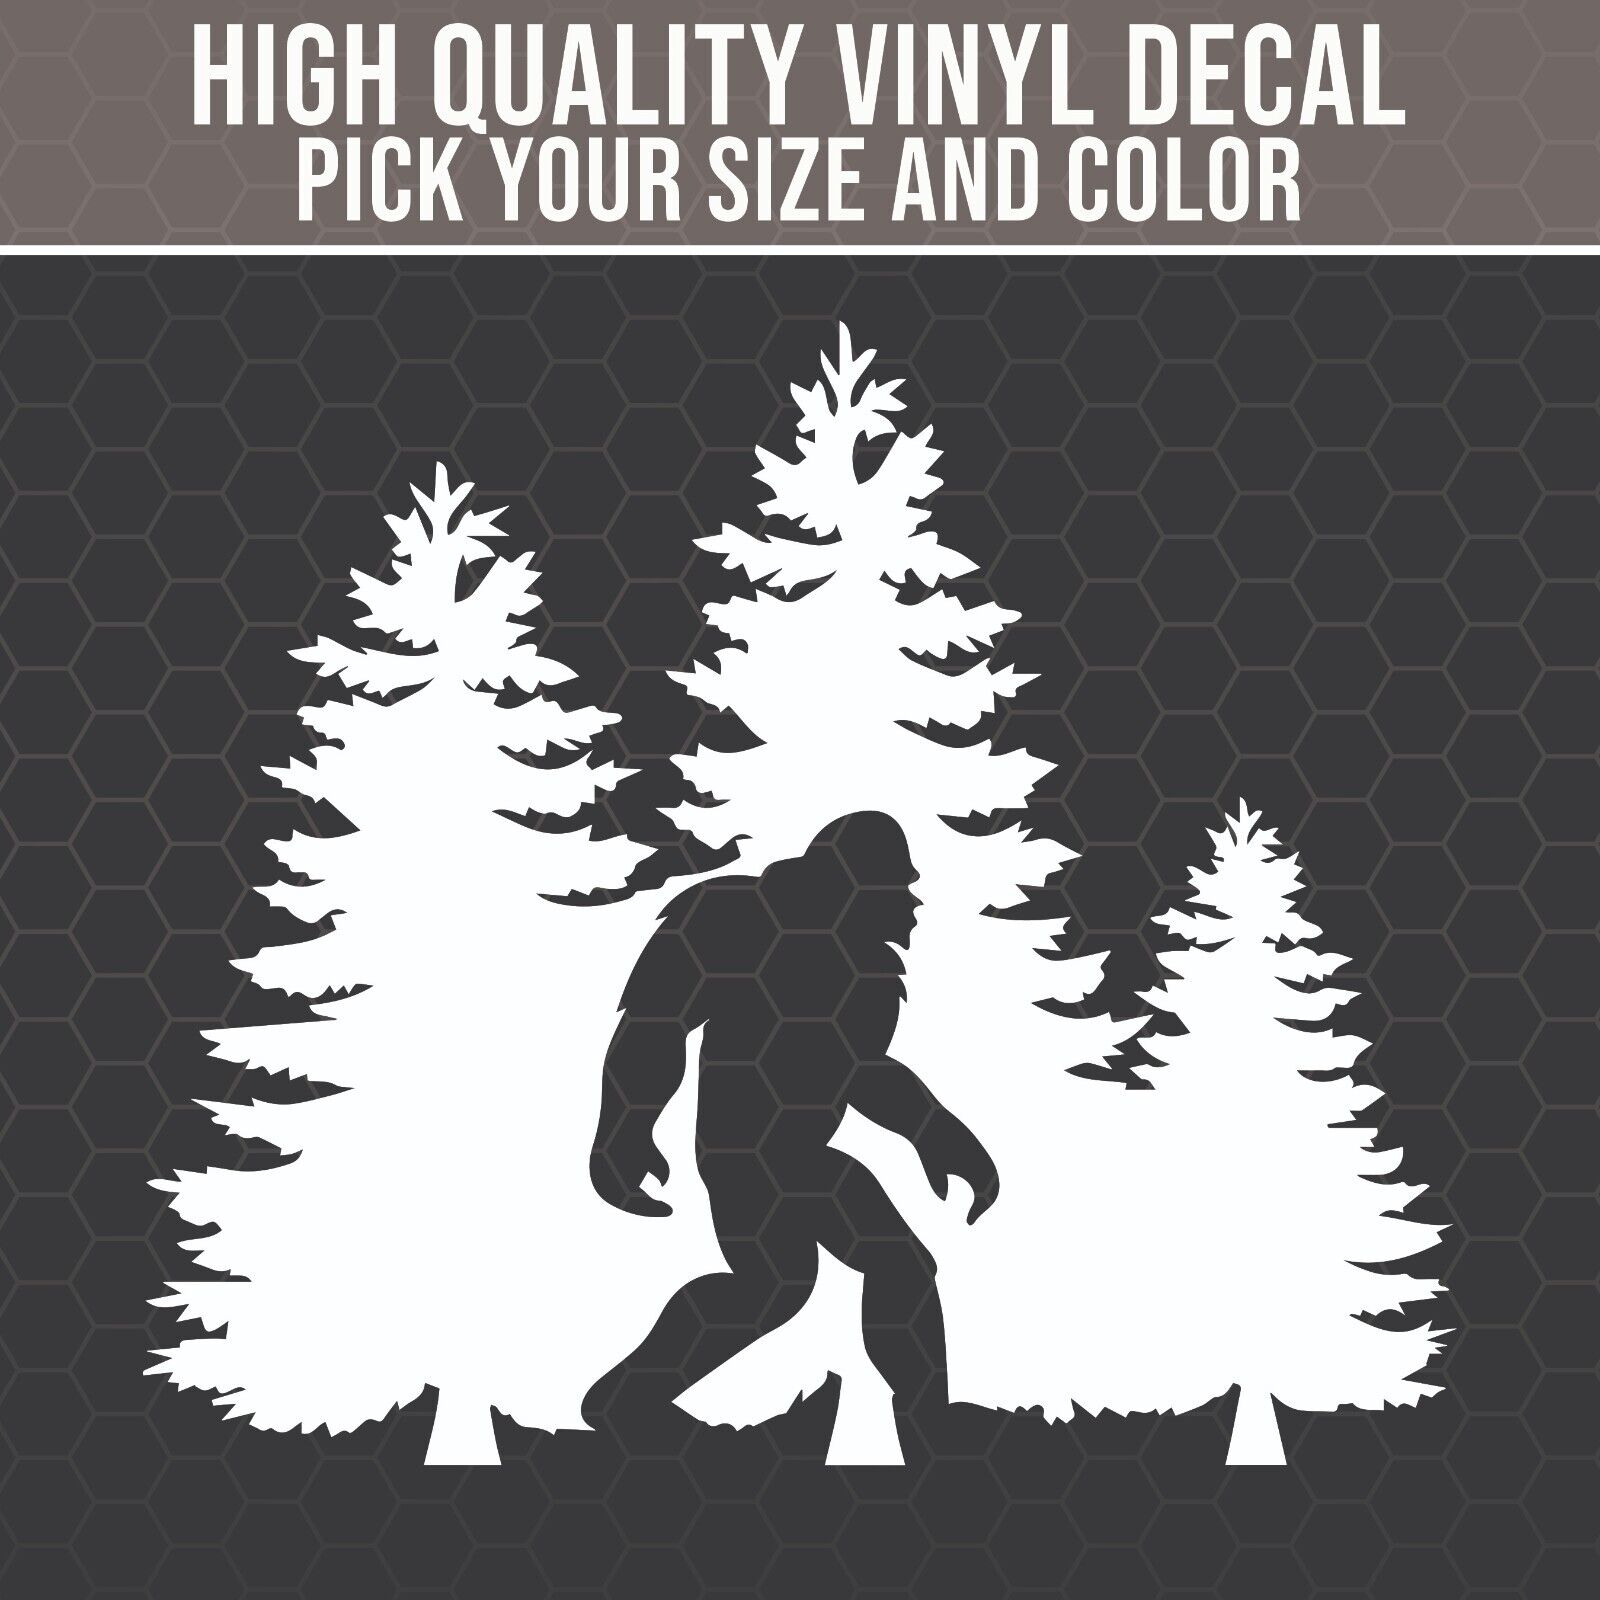 Bigfoot Decal, Sasquatch Decal for Car, Cryptid Decal for truck, Bigfoot sticker